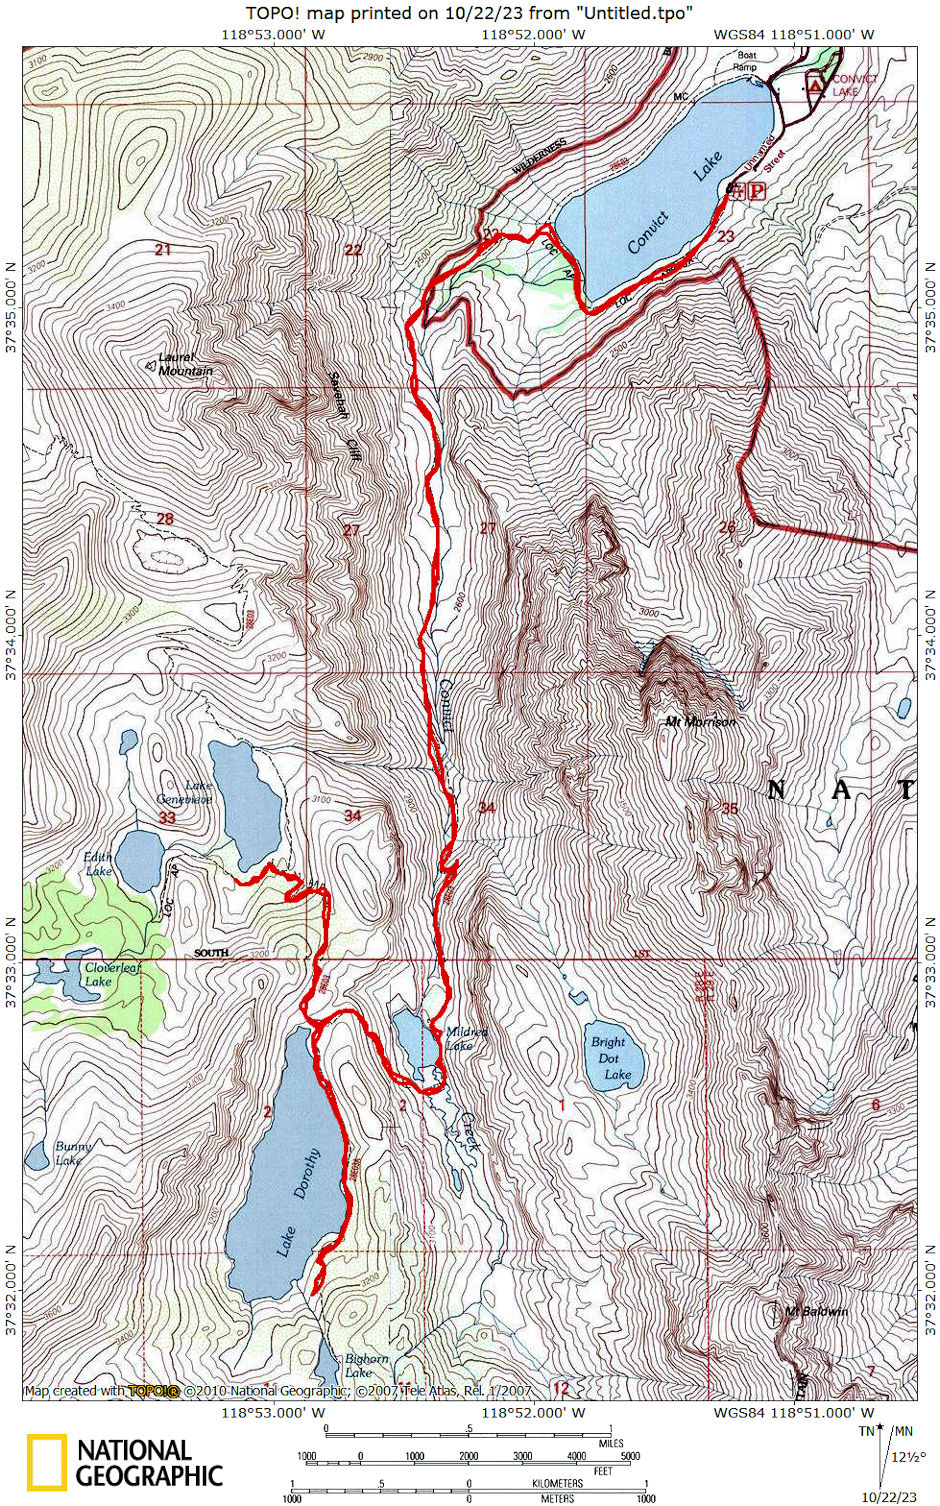 Backpack trip route on Convict Creek Trail in 1973